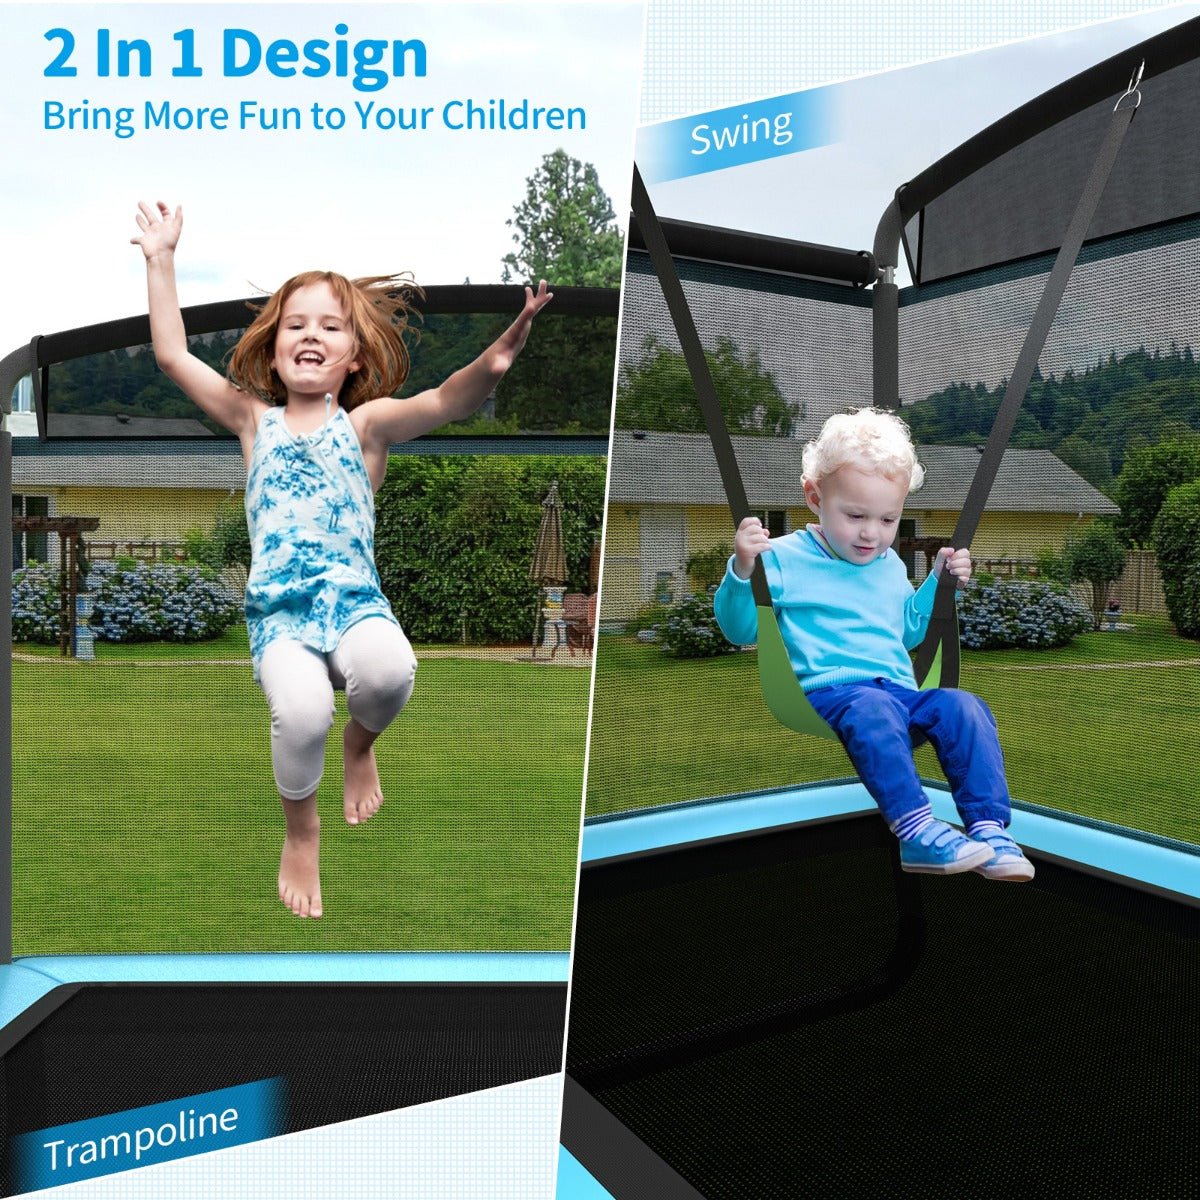 Kids Delight: Sturdy Recreational Trampoline with Swing for Kids Blue